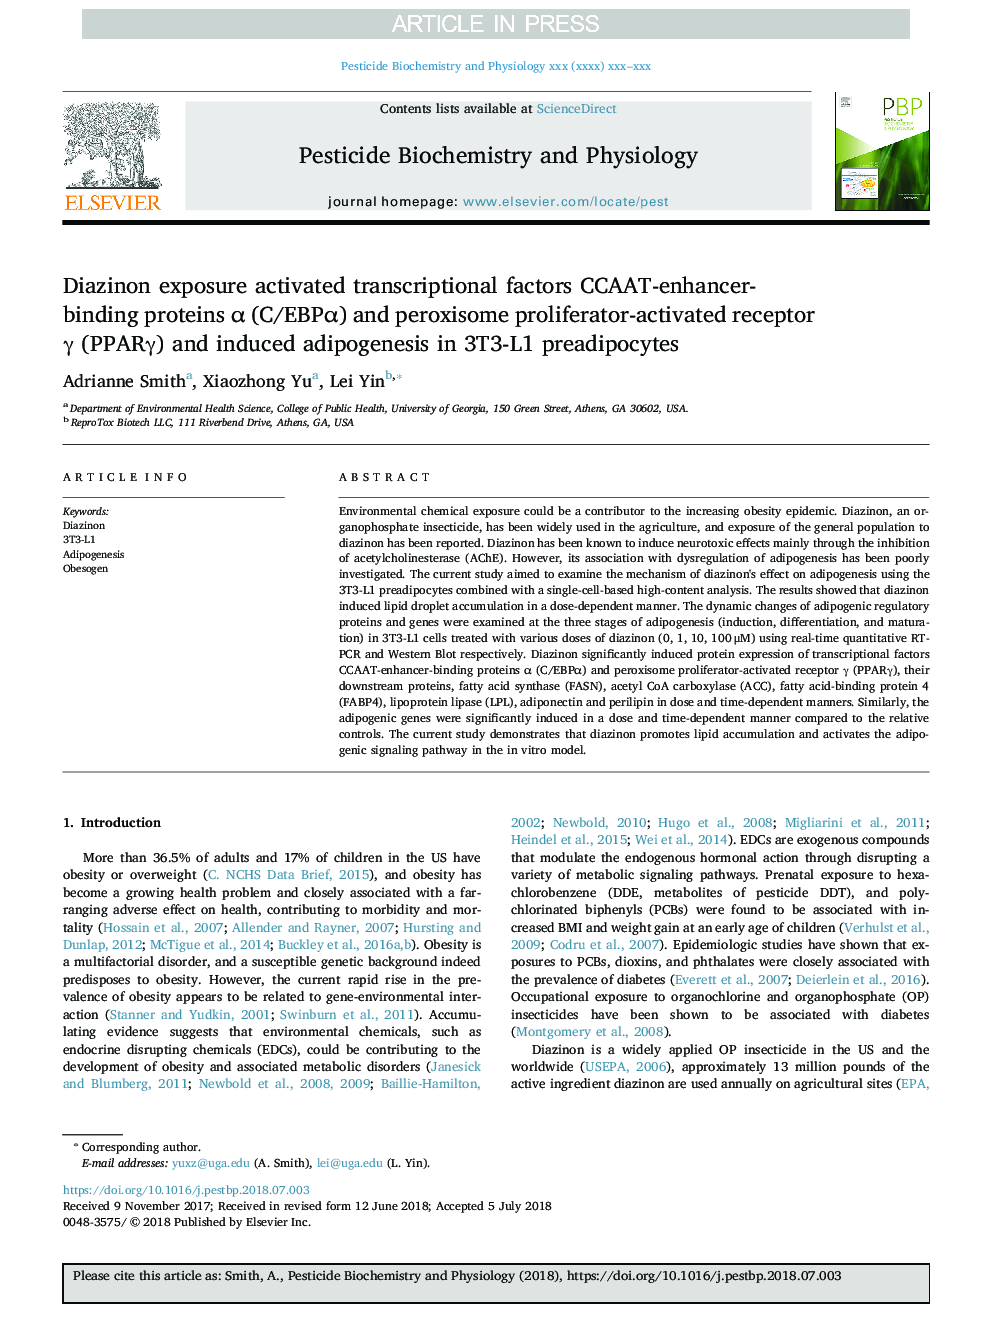 Diazinon exposure activated transcriptional factors CCAAT-enhancer-binding proteins Î± (C/EBPÎ±) and peroxisome proliferator-activated receptor Î³ (PPARÎ³) and induced adipogenesis in 3T3-L1 preadipocytes